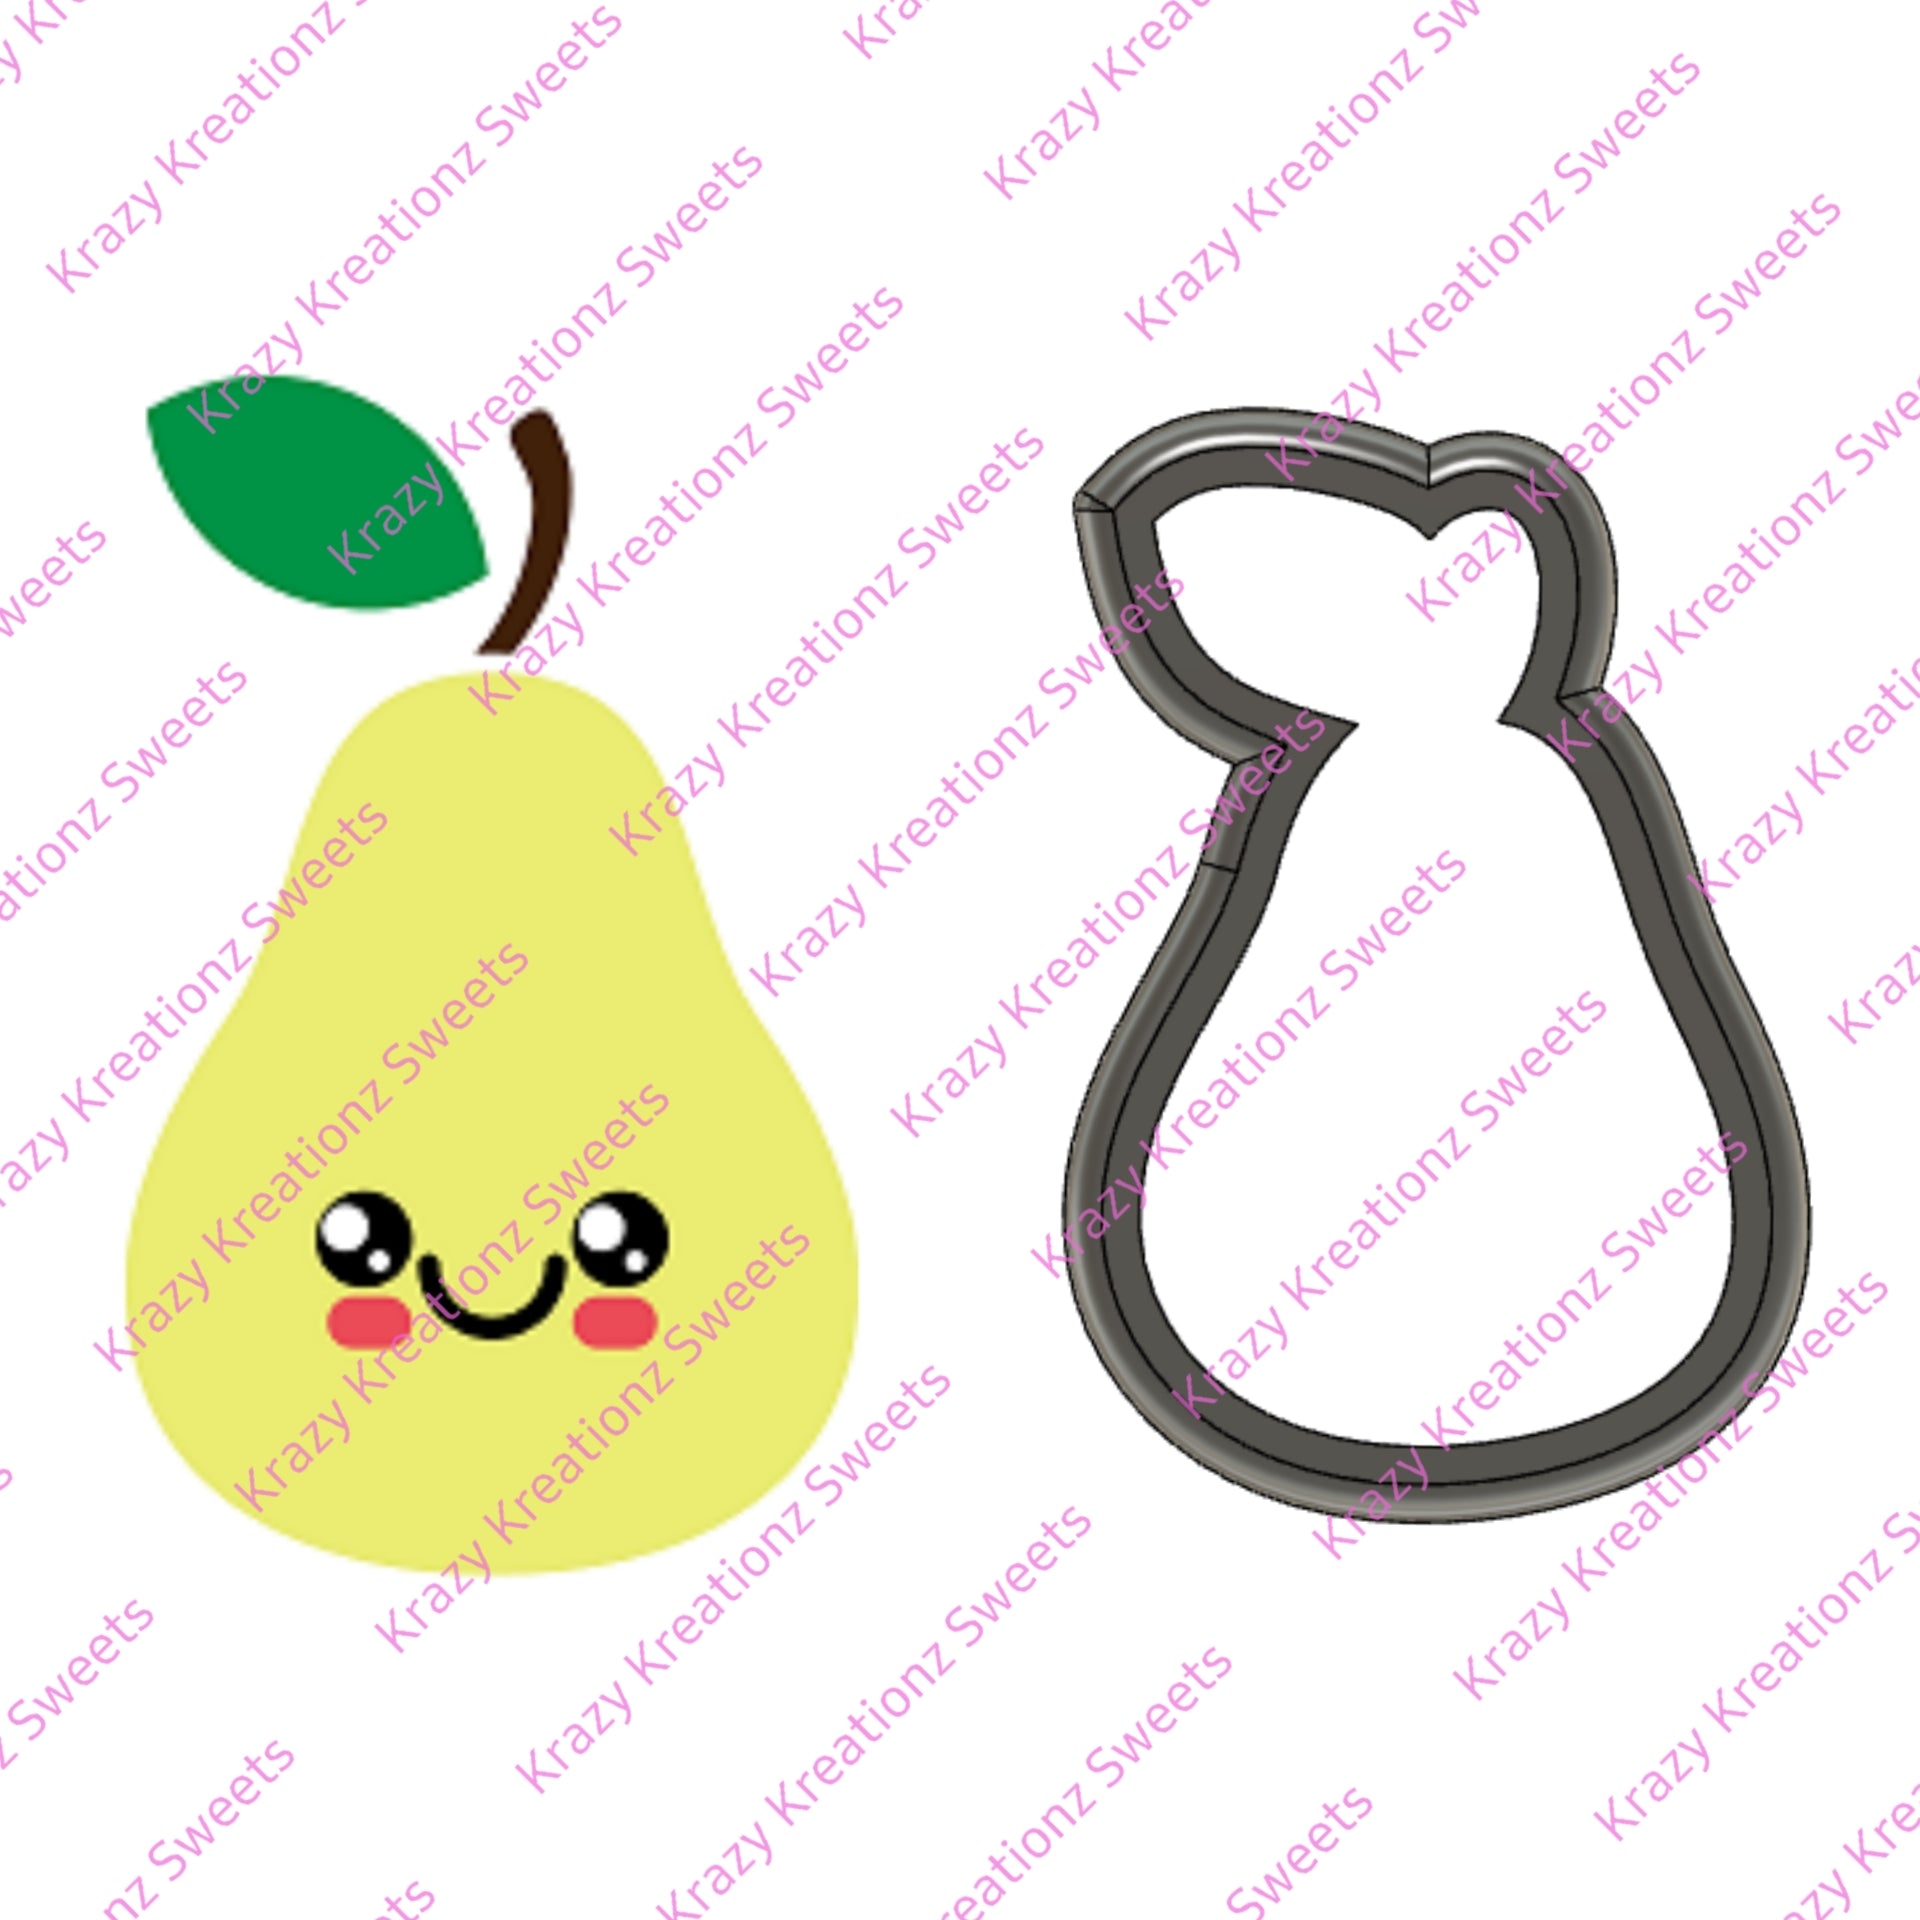 Smiley Pear Cookie Cutter